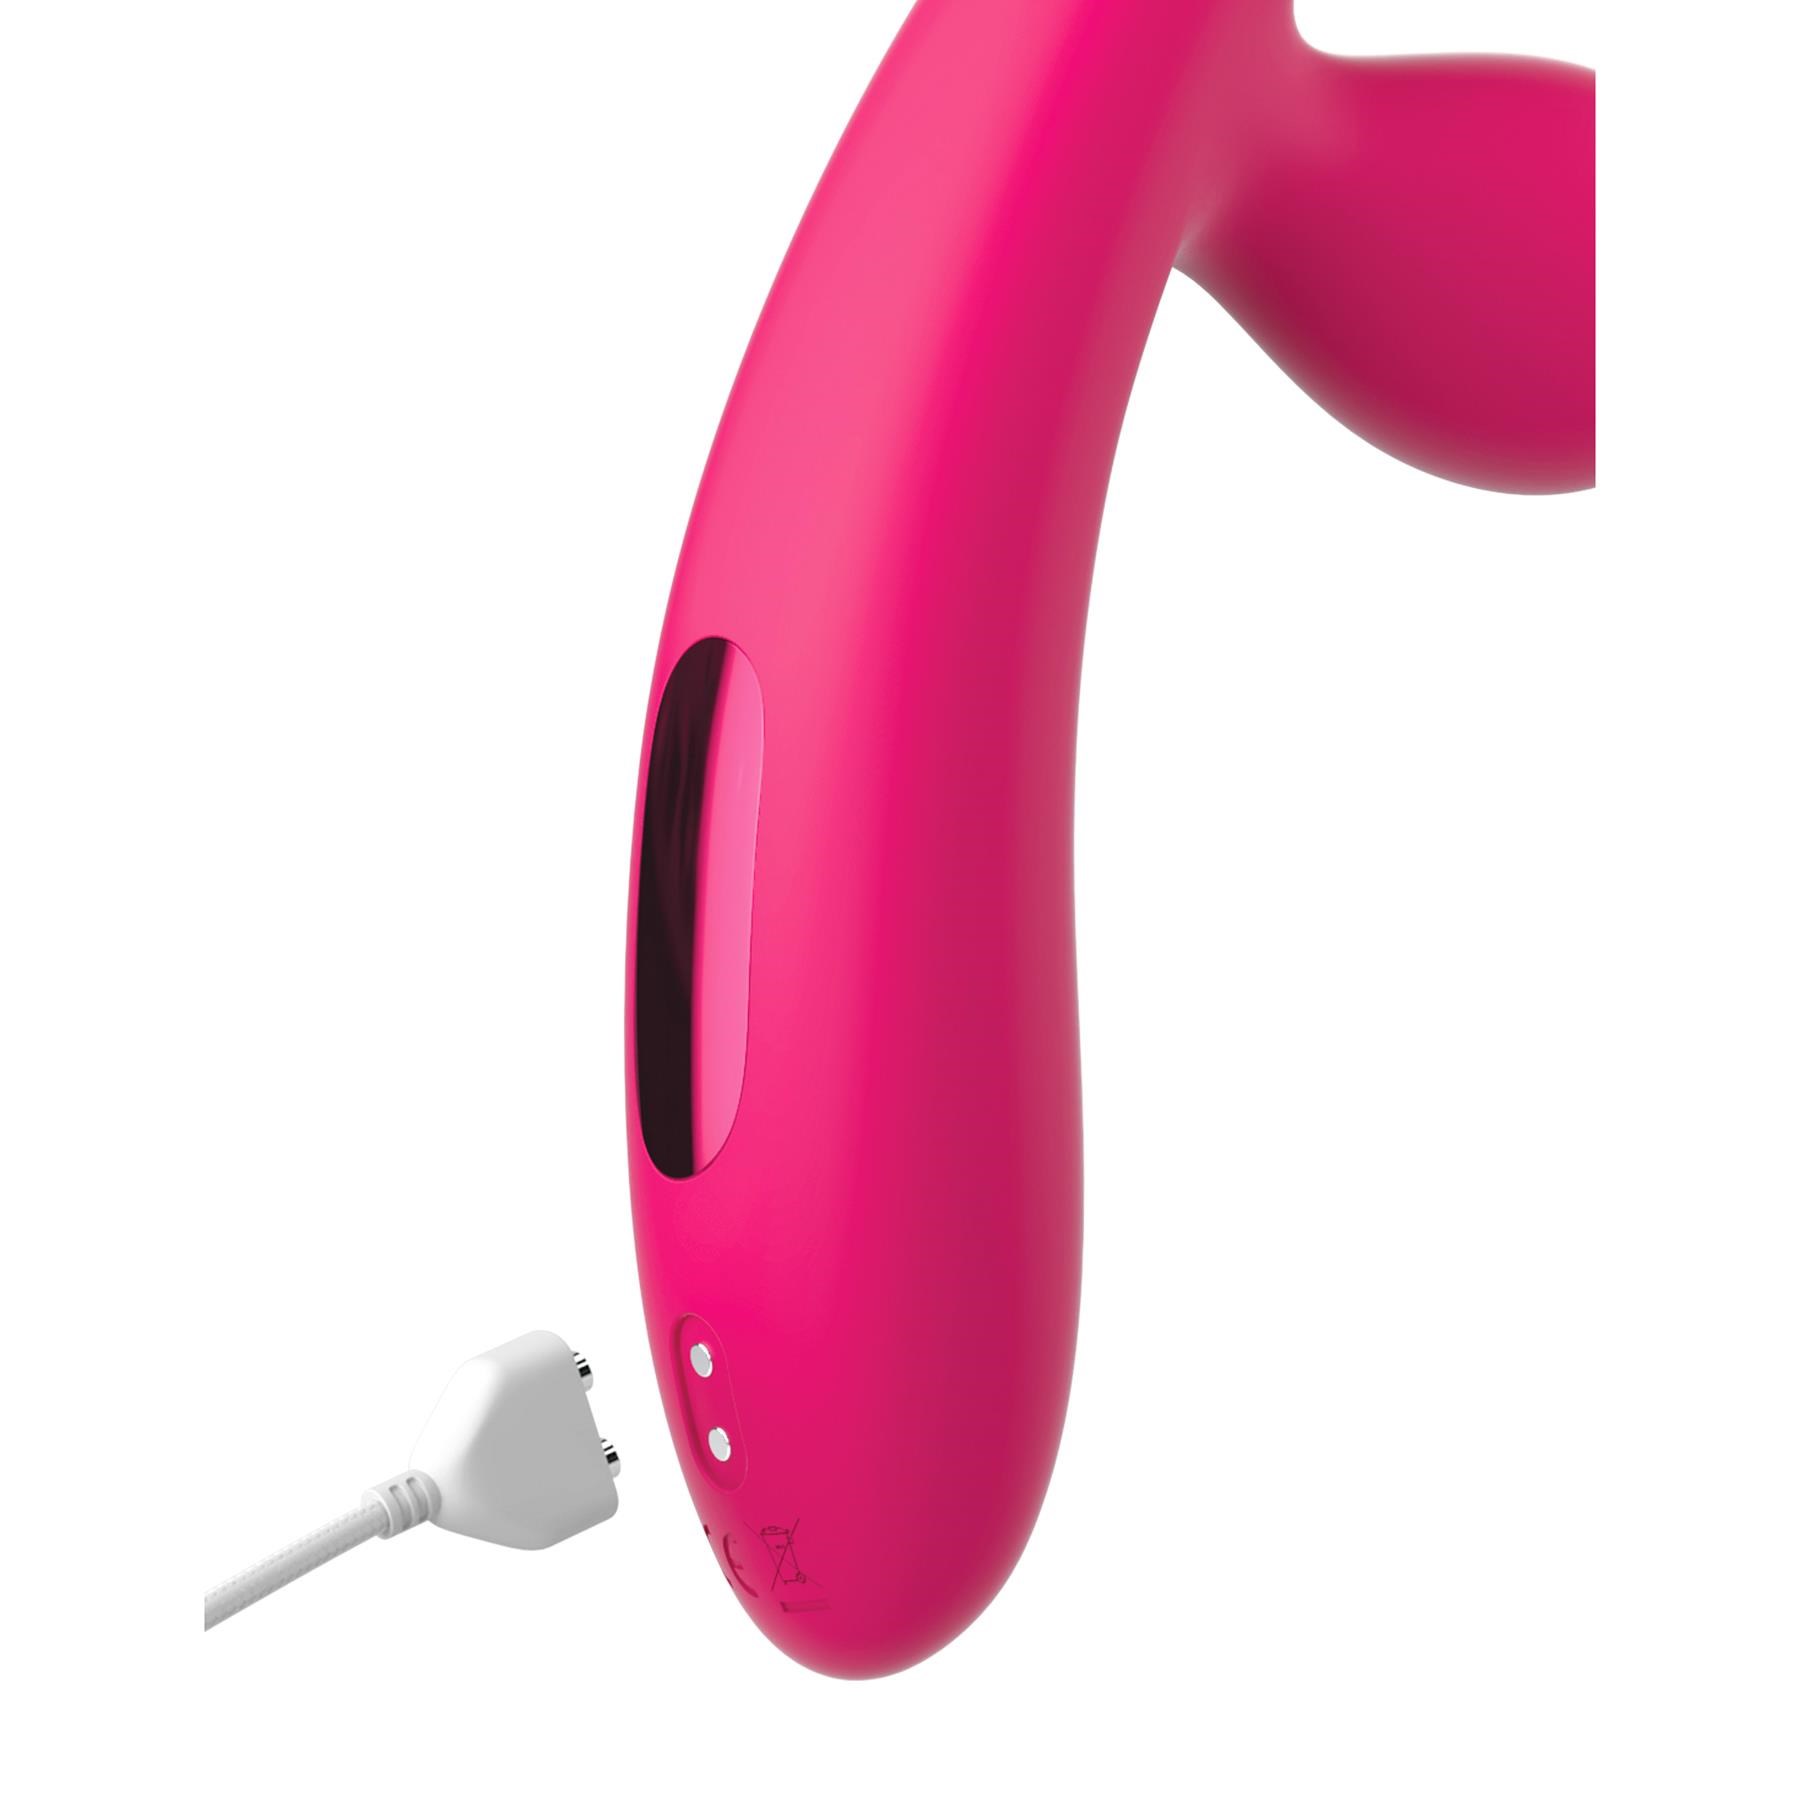 Jimmy Jane Reflexx Rabbit 3 Vibrator - Showing Where Charging Cable is Placed